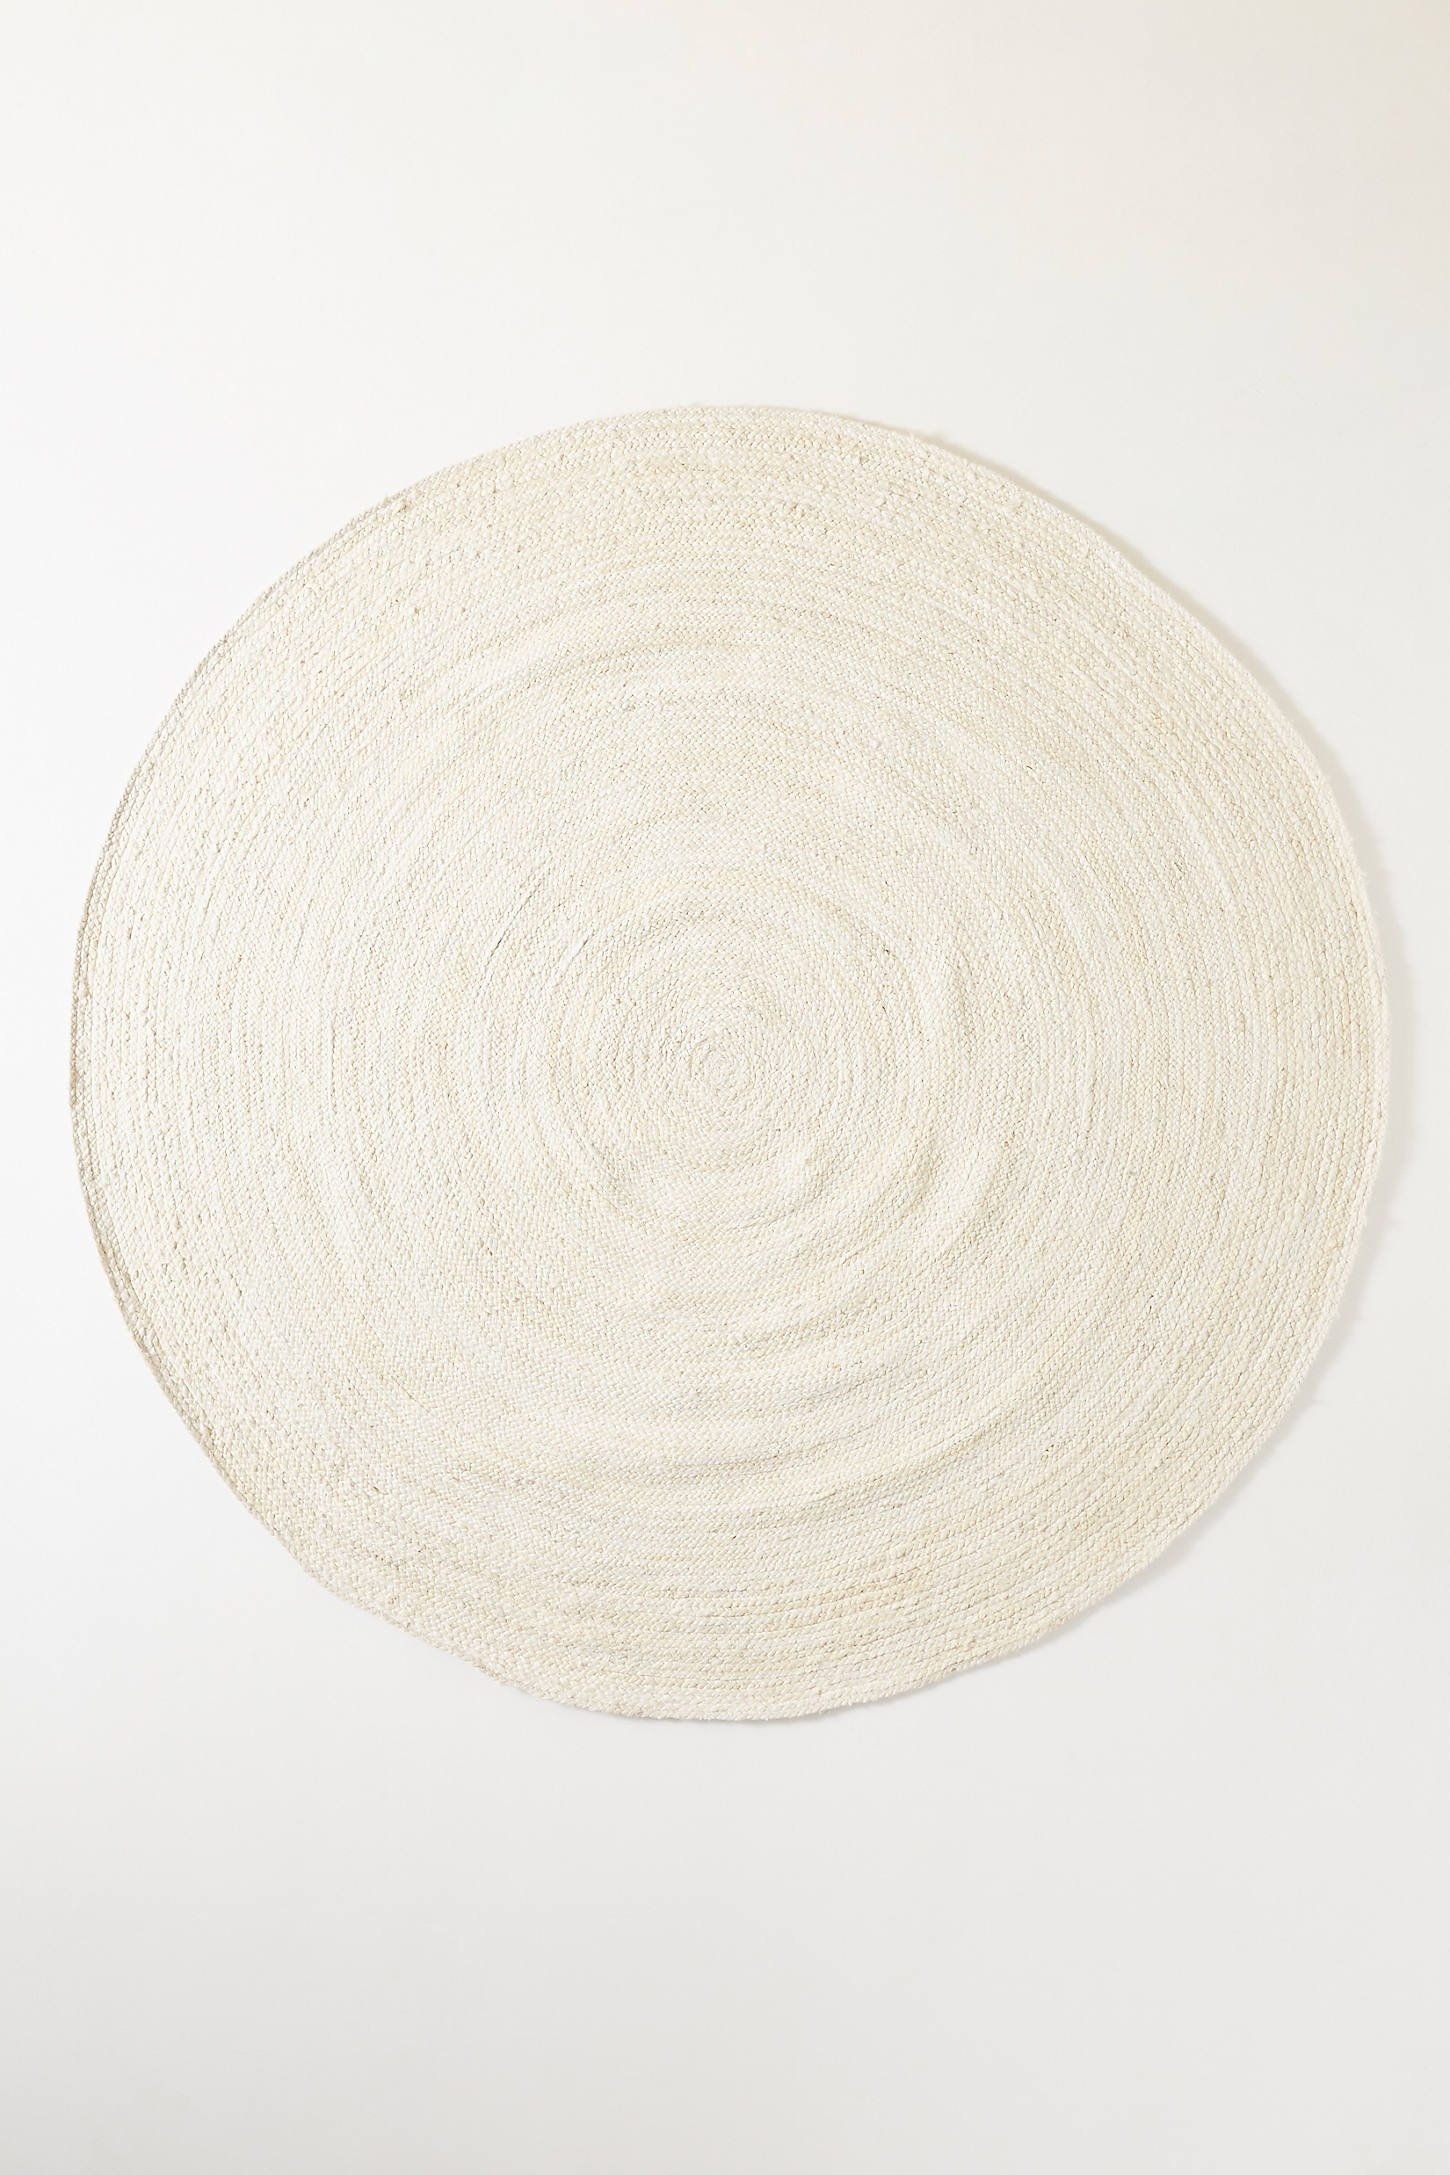 Handwoven Lorne Round Rug By Anthropologie in White Size 8 D - Image 0